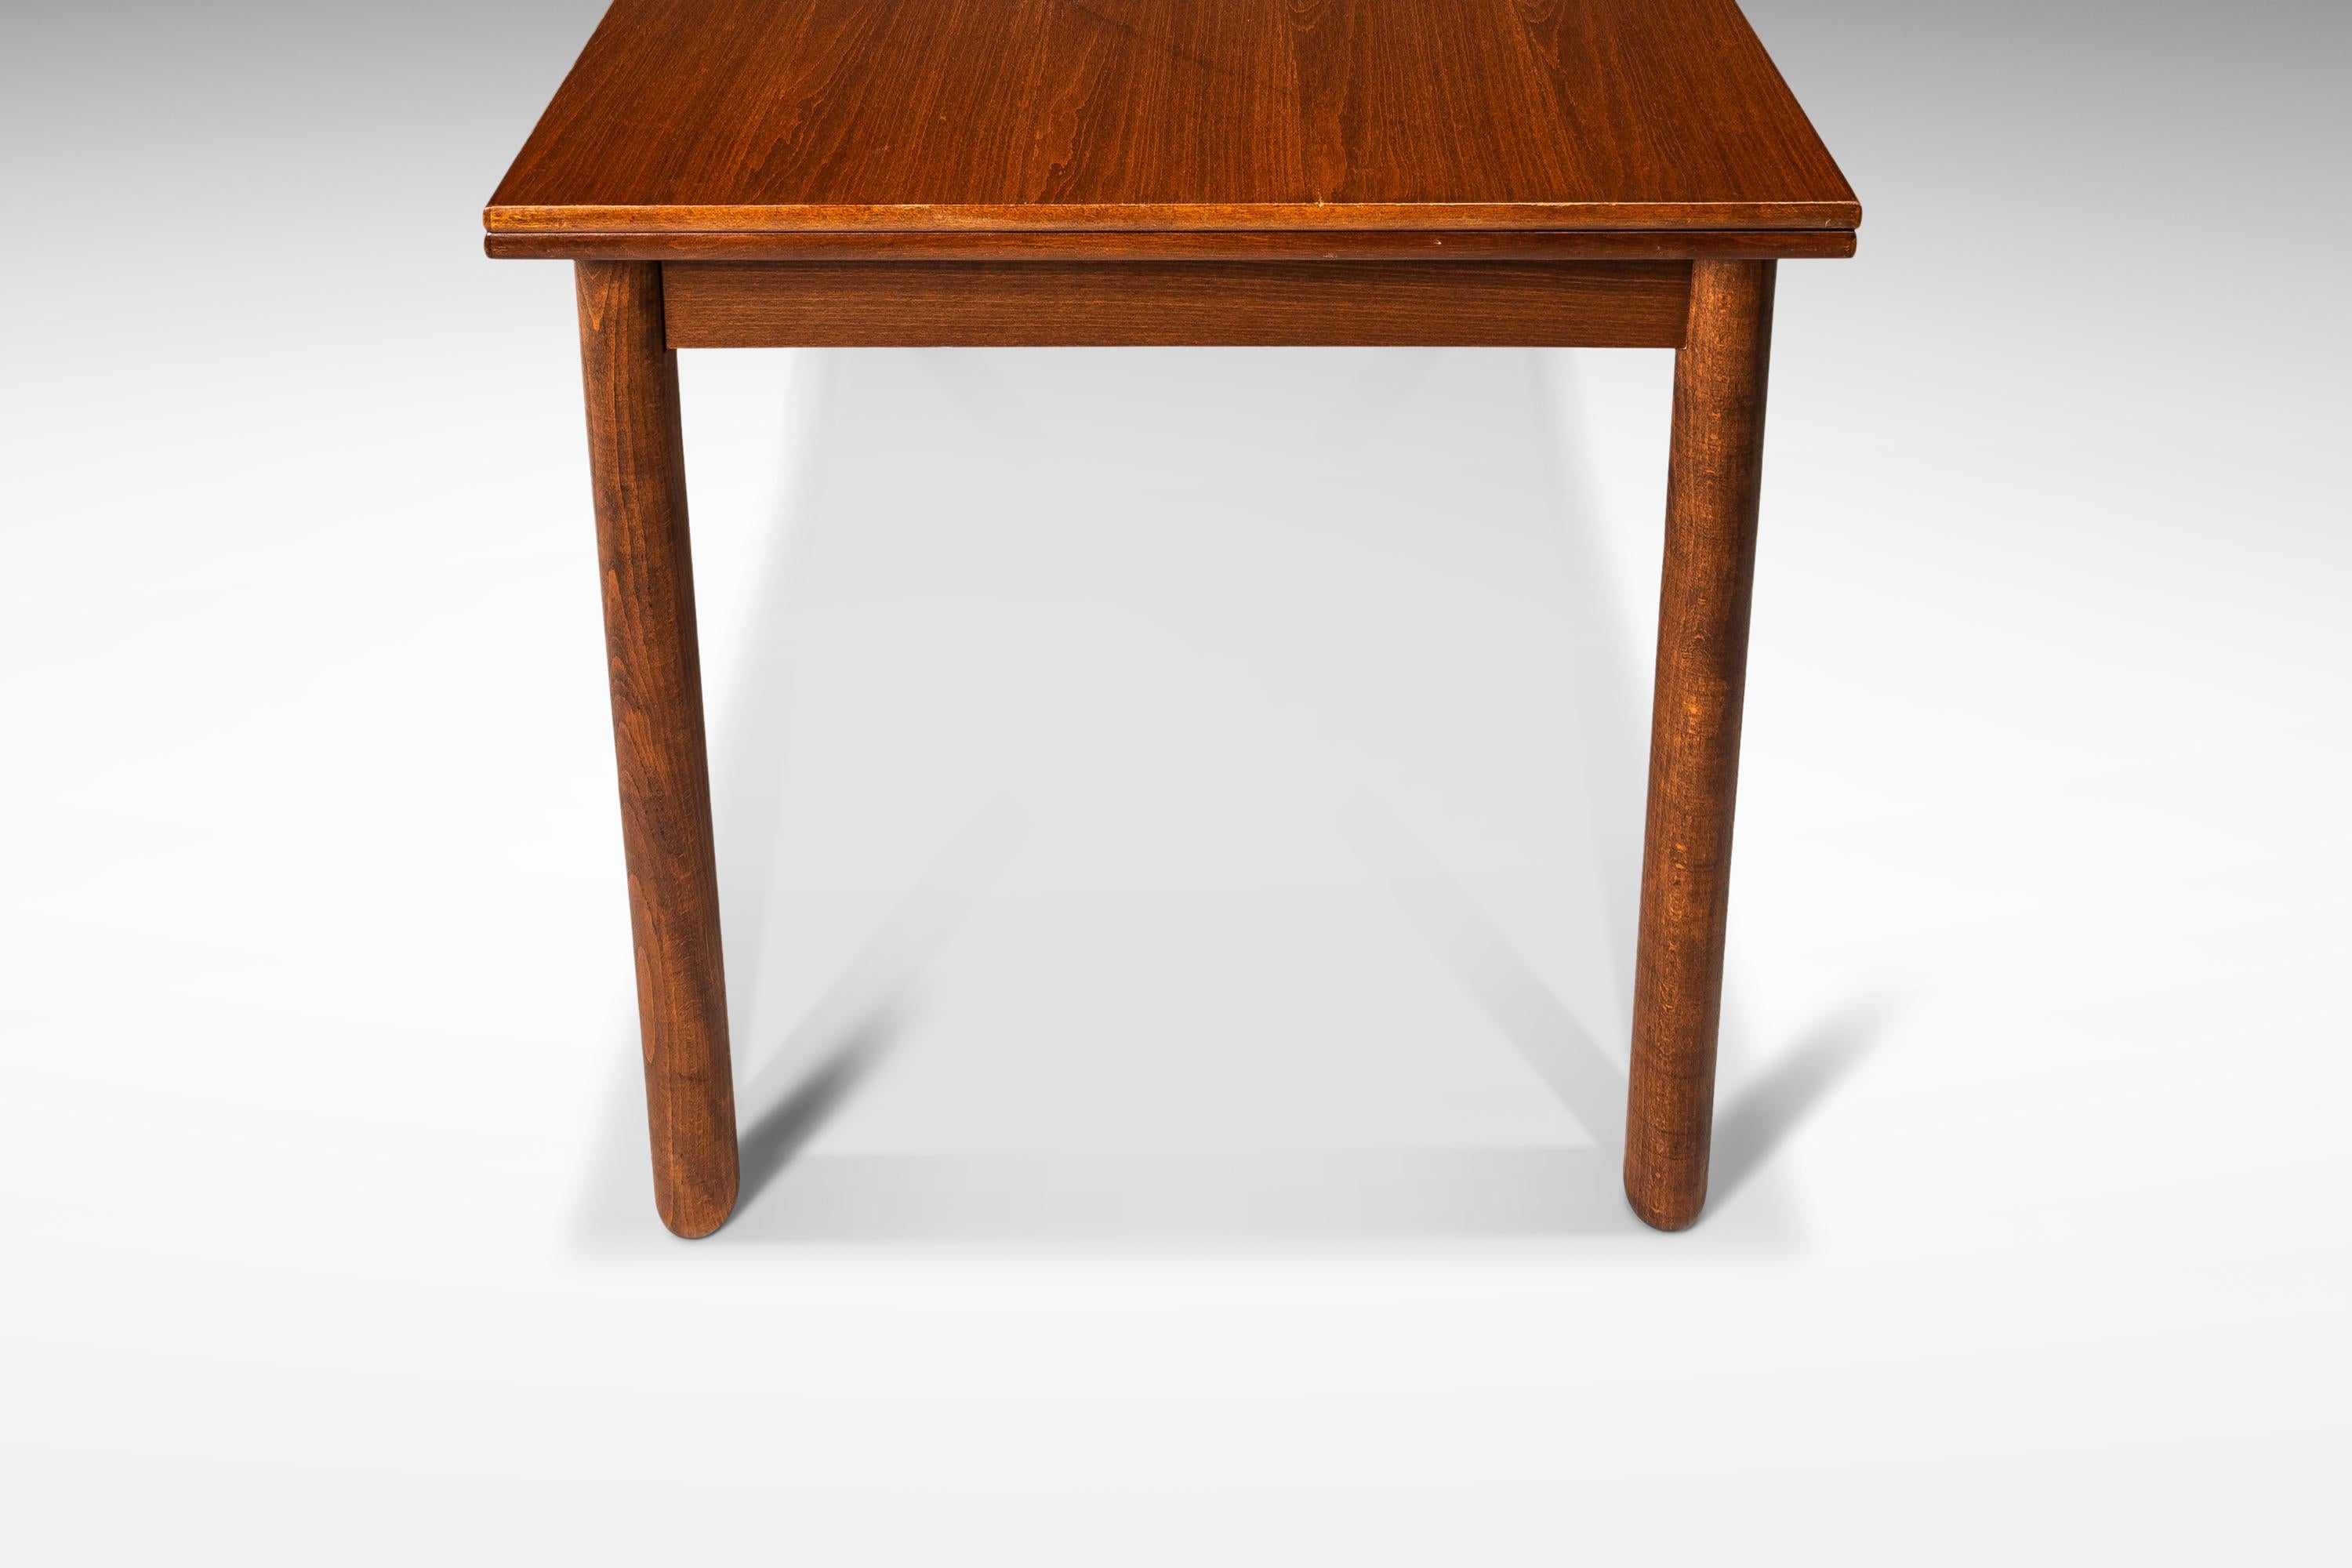 Walnut Extension Flip-Flap Dining Table, Folke Ohlsson Style, USA, c. 1960's For Sale 7